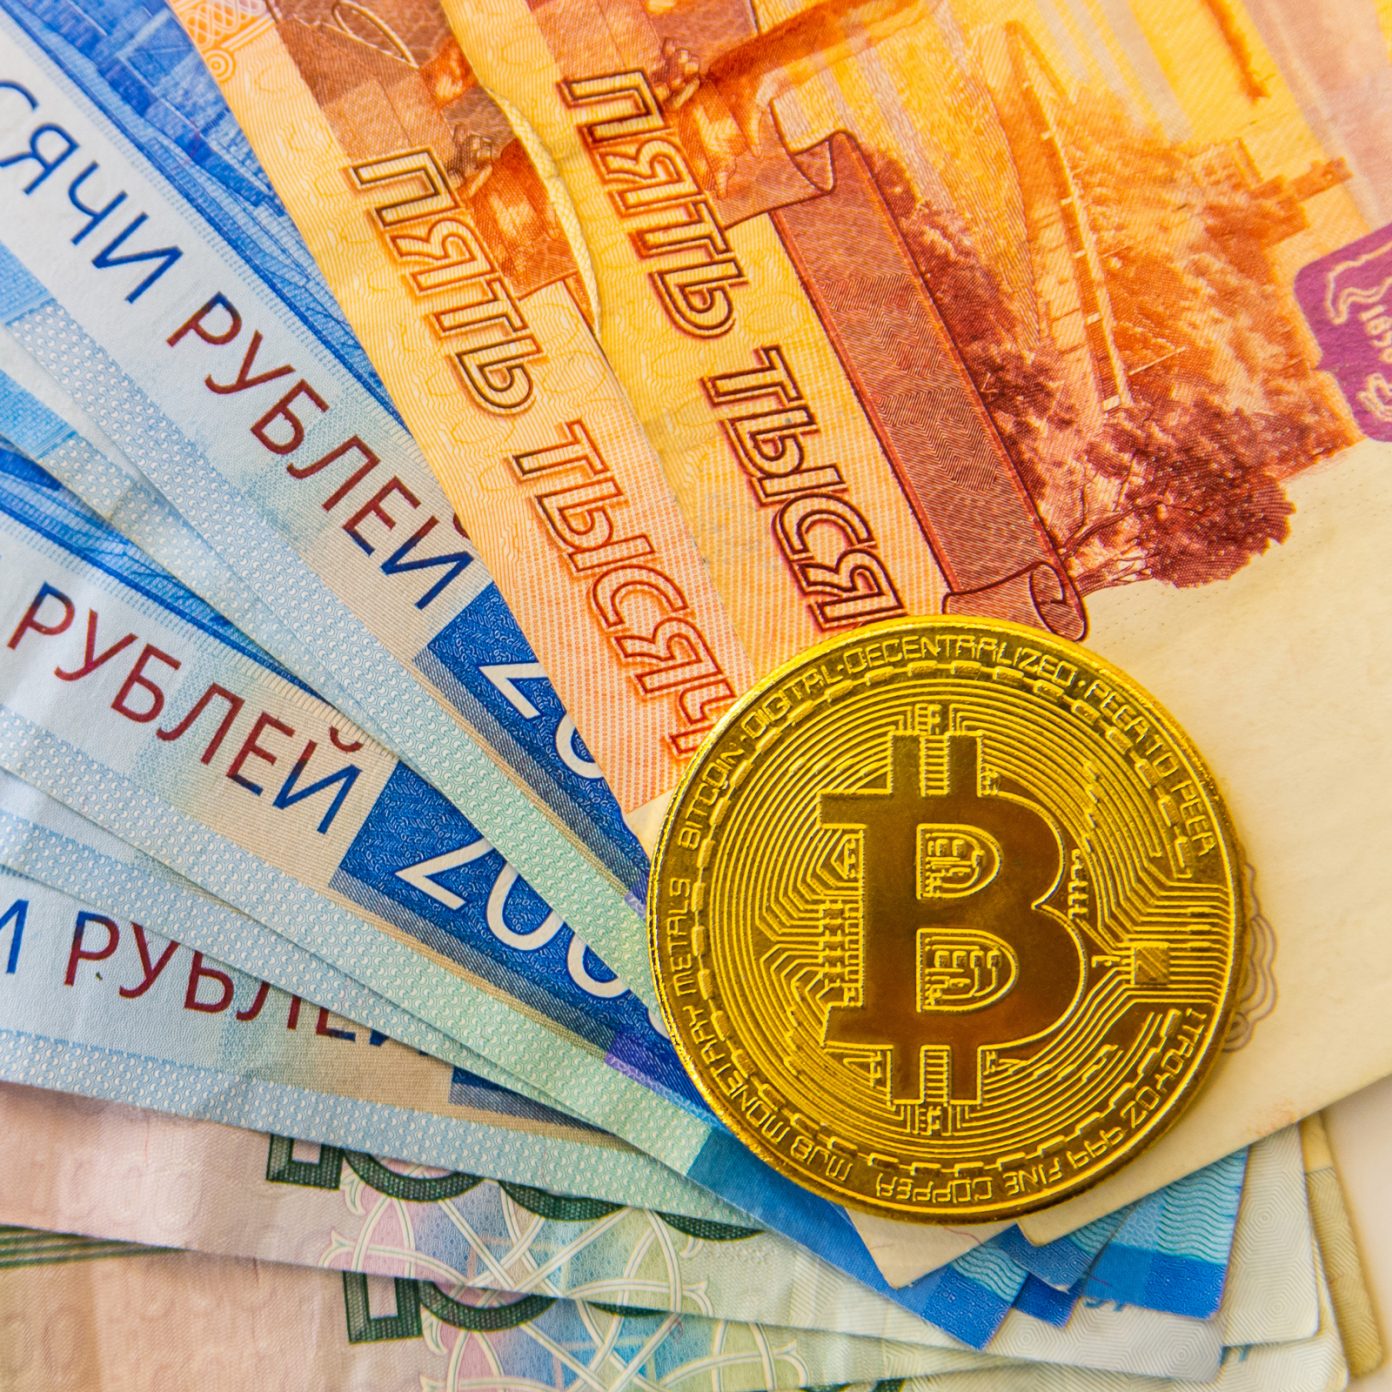 Cash to Crypto Trade Blooming in Moscow, Reports Say ...